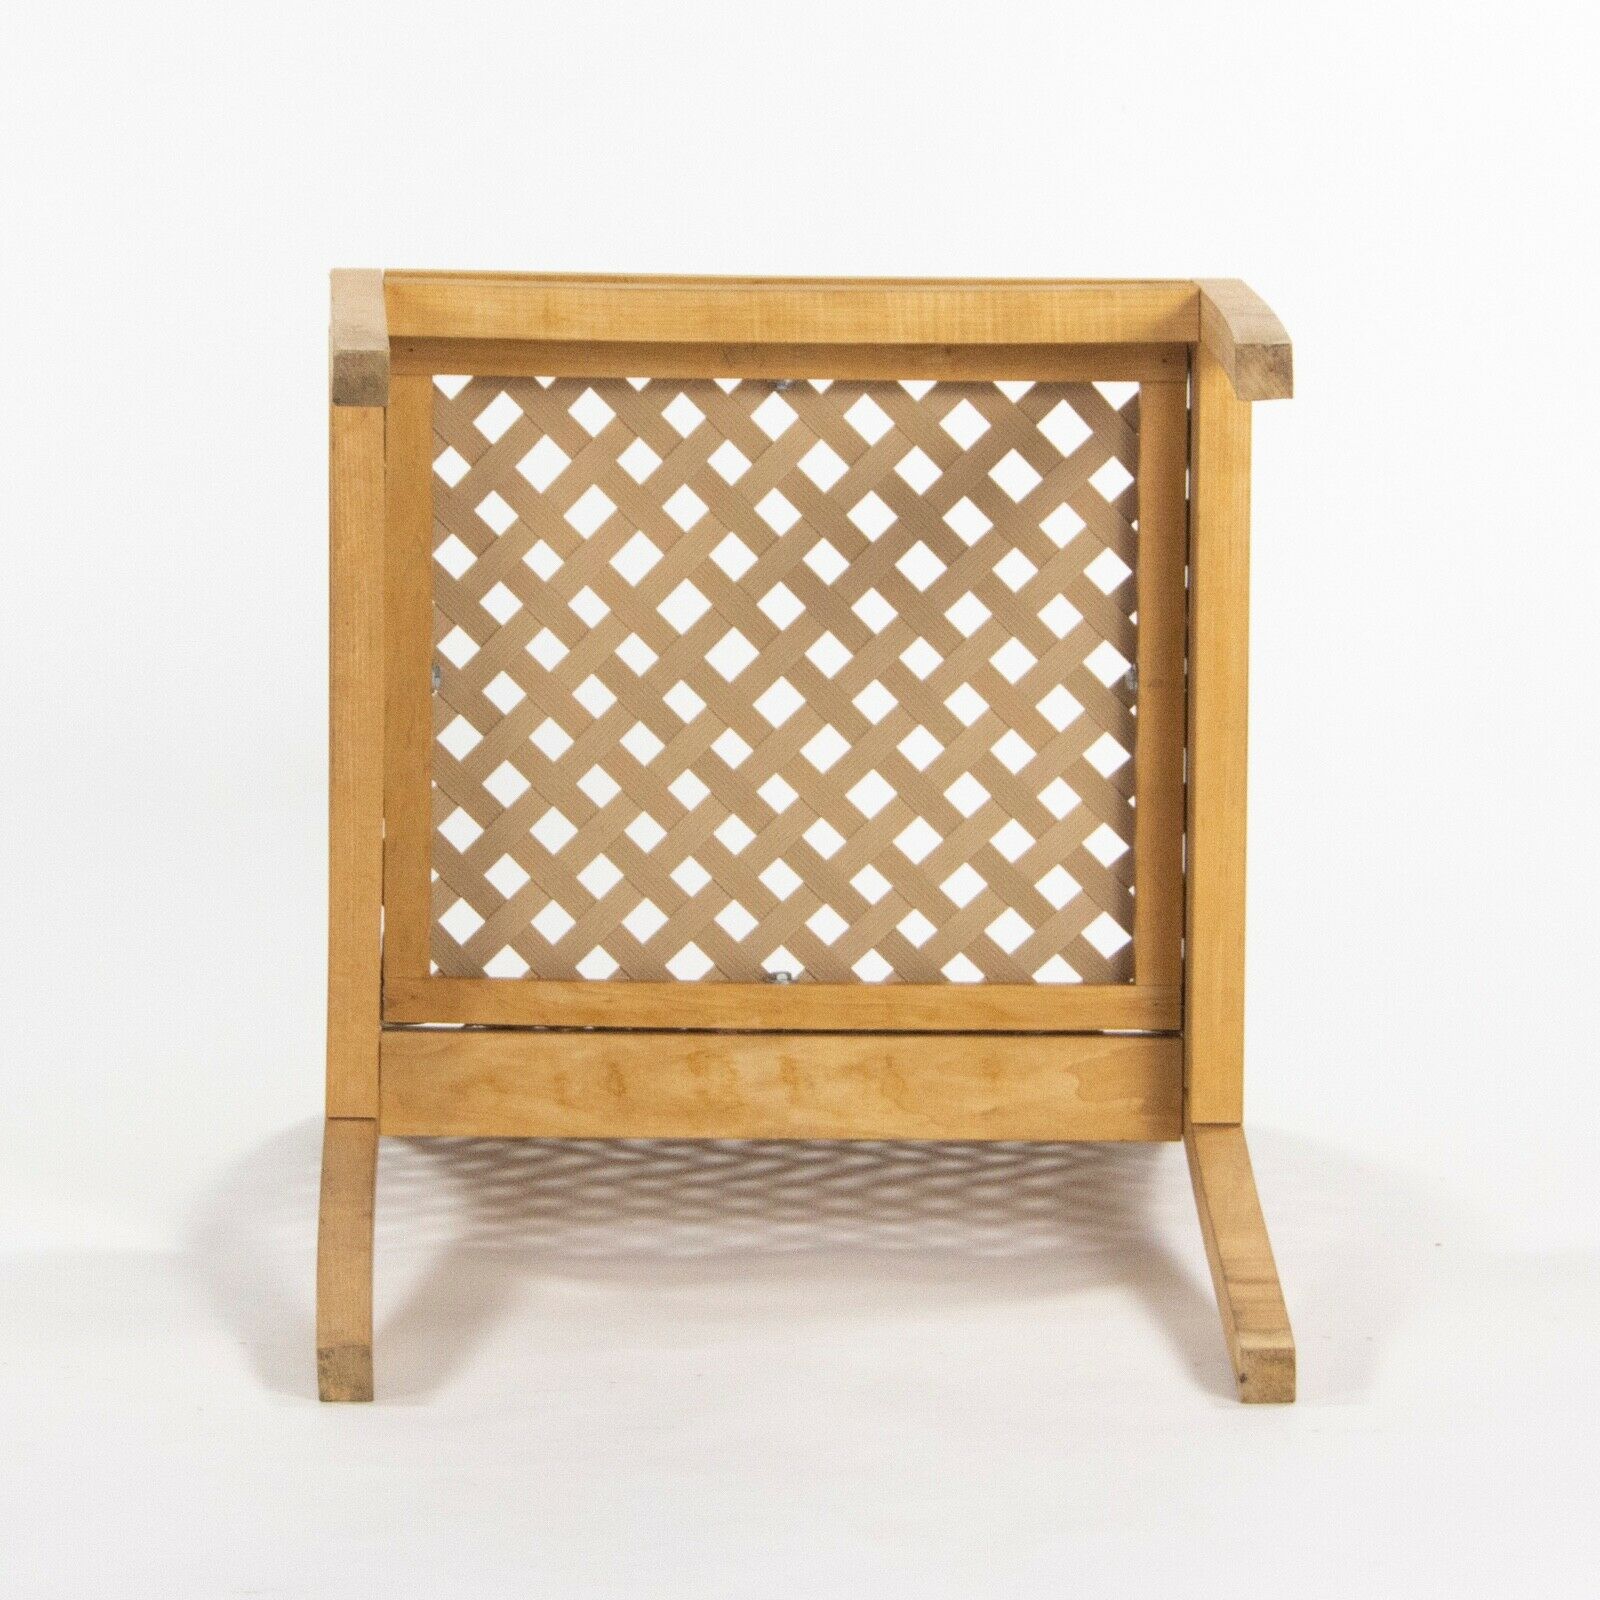 SOLD Prototype Dining Chair Designed by Richard Schultz c. 1985 Wooden Outdoor Chair